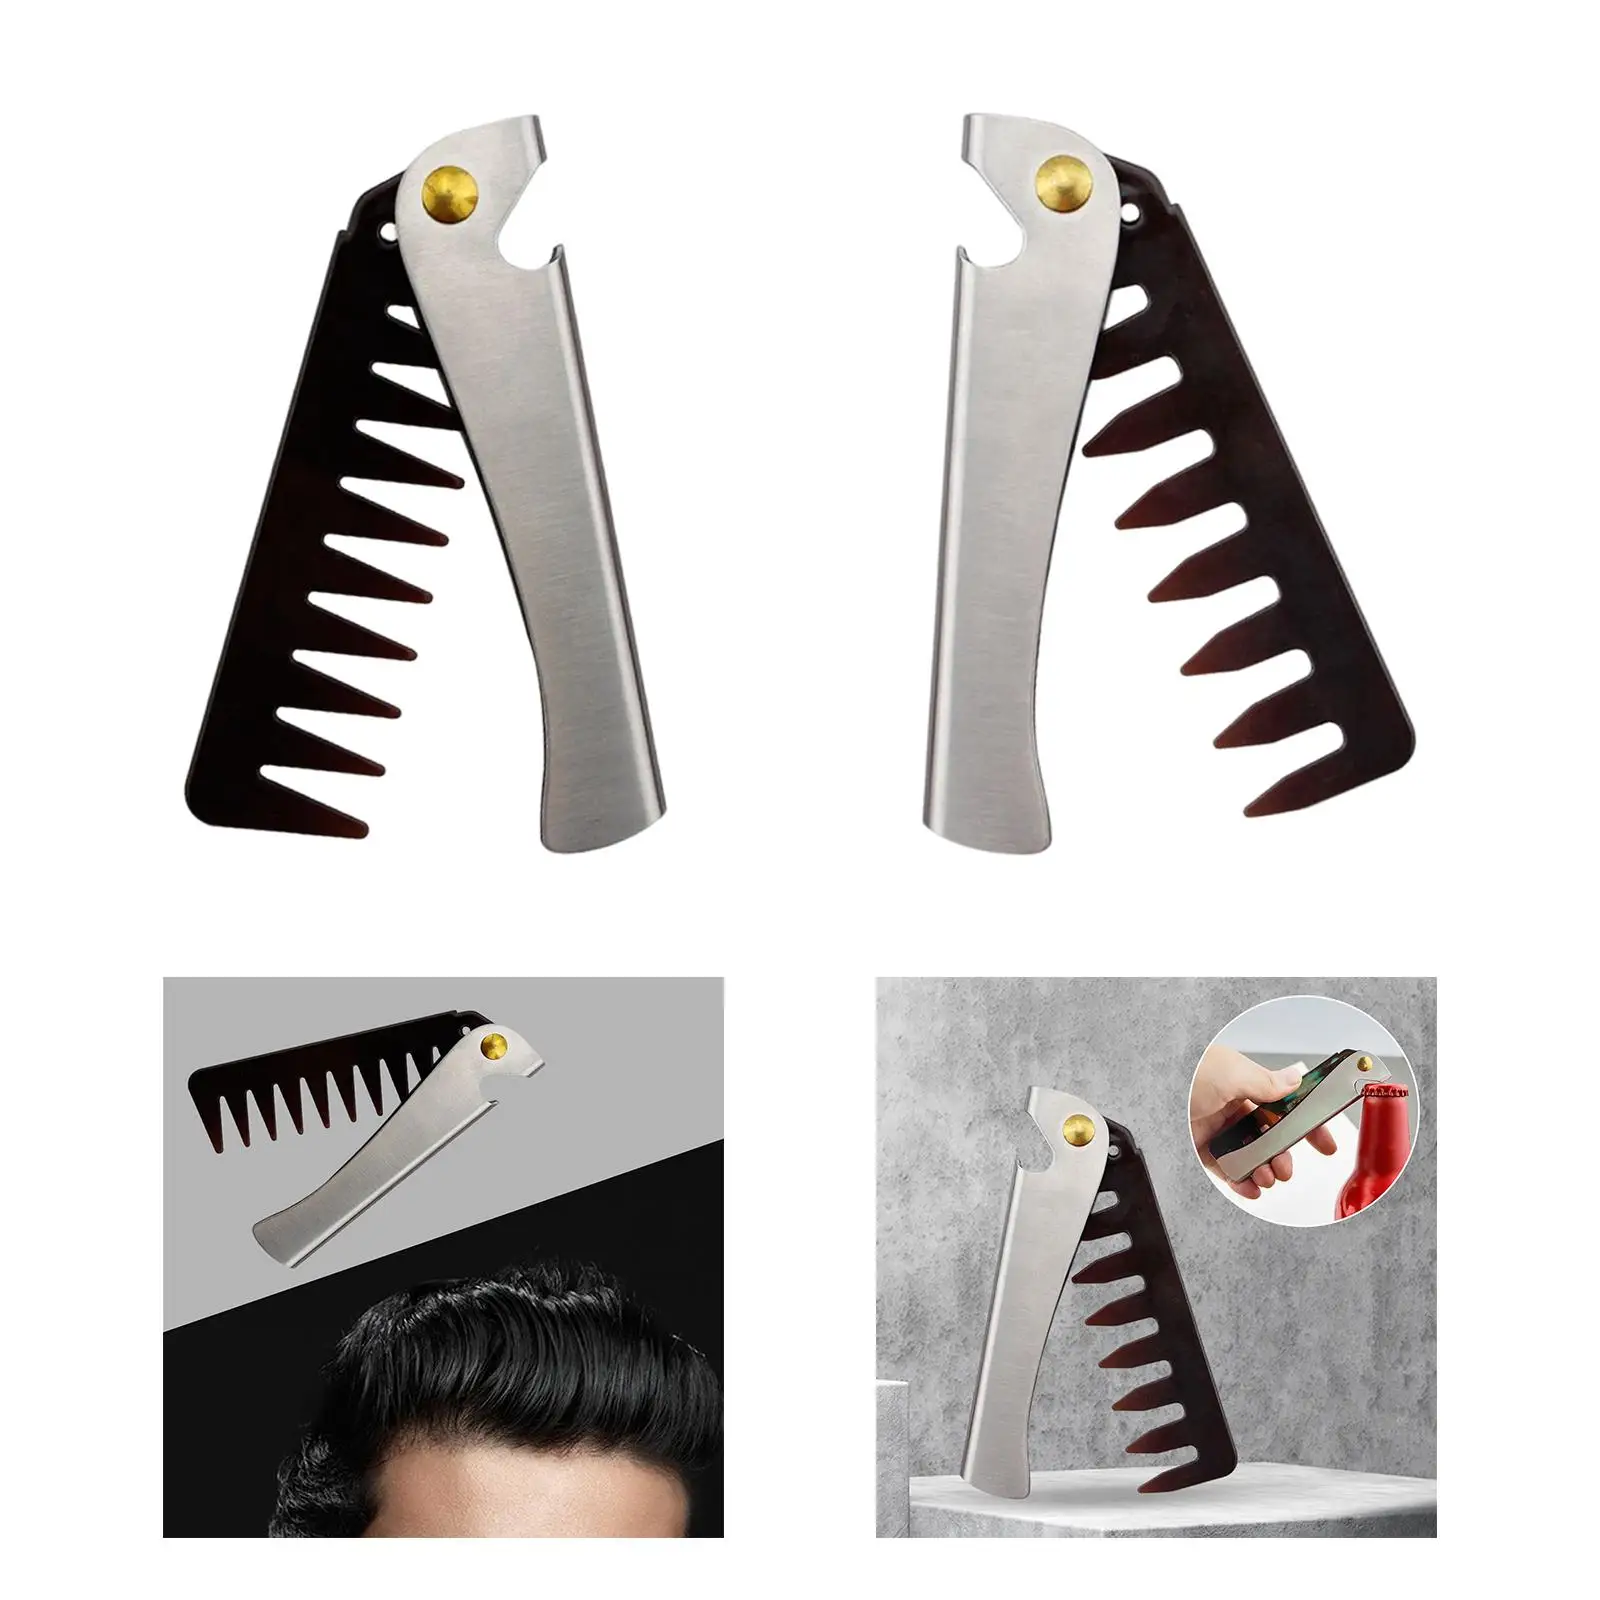 Portable Folding Beard Comb for Men Grooming Styling Hair or Mustache Stainless Steel Pocket Comb for Home Use Beauty Salon